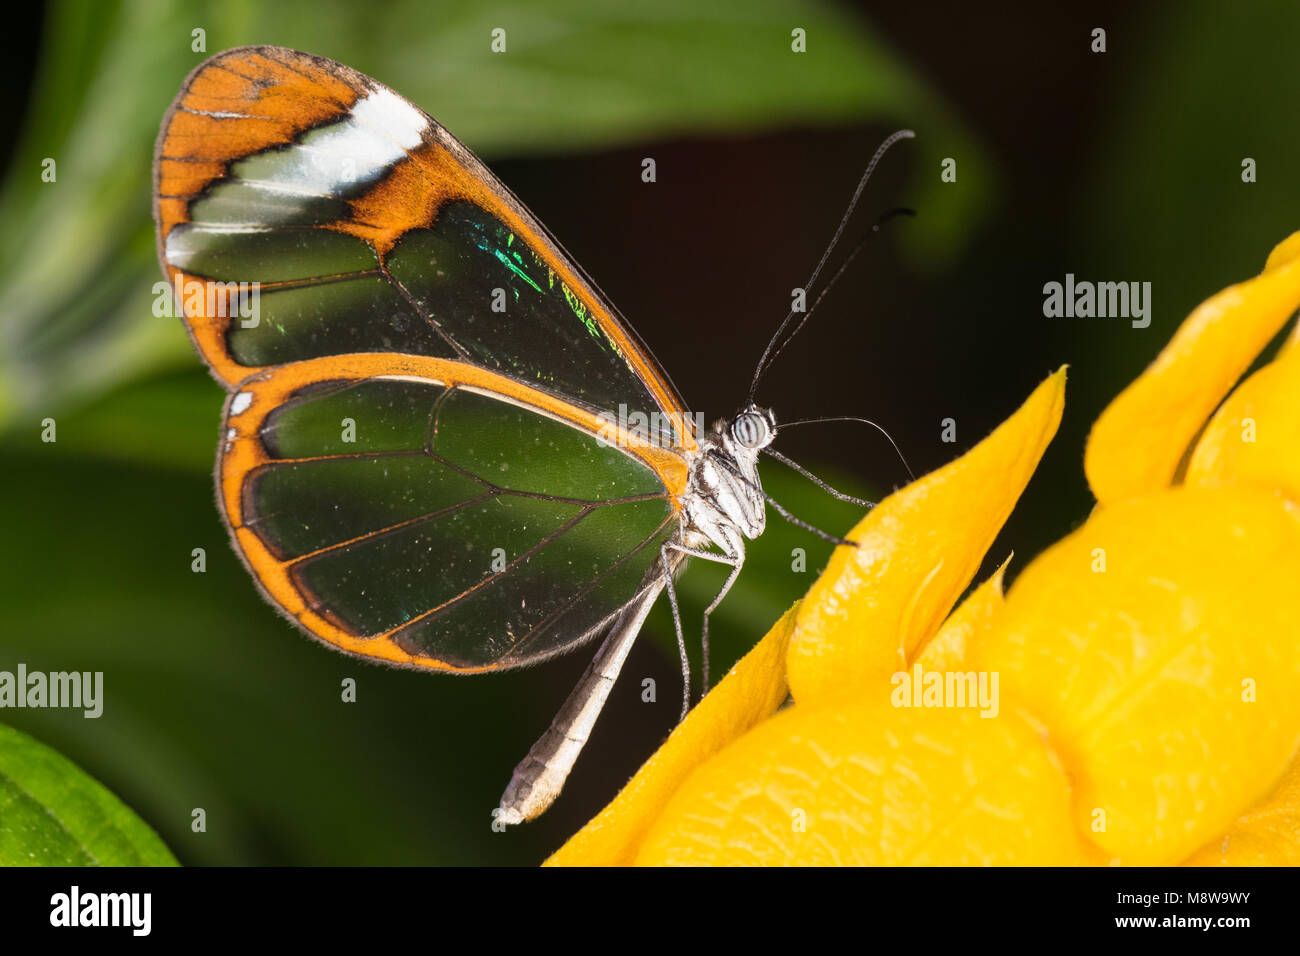 Glasswing butterfly feeding from a plant Stock Photo